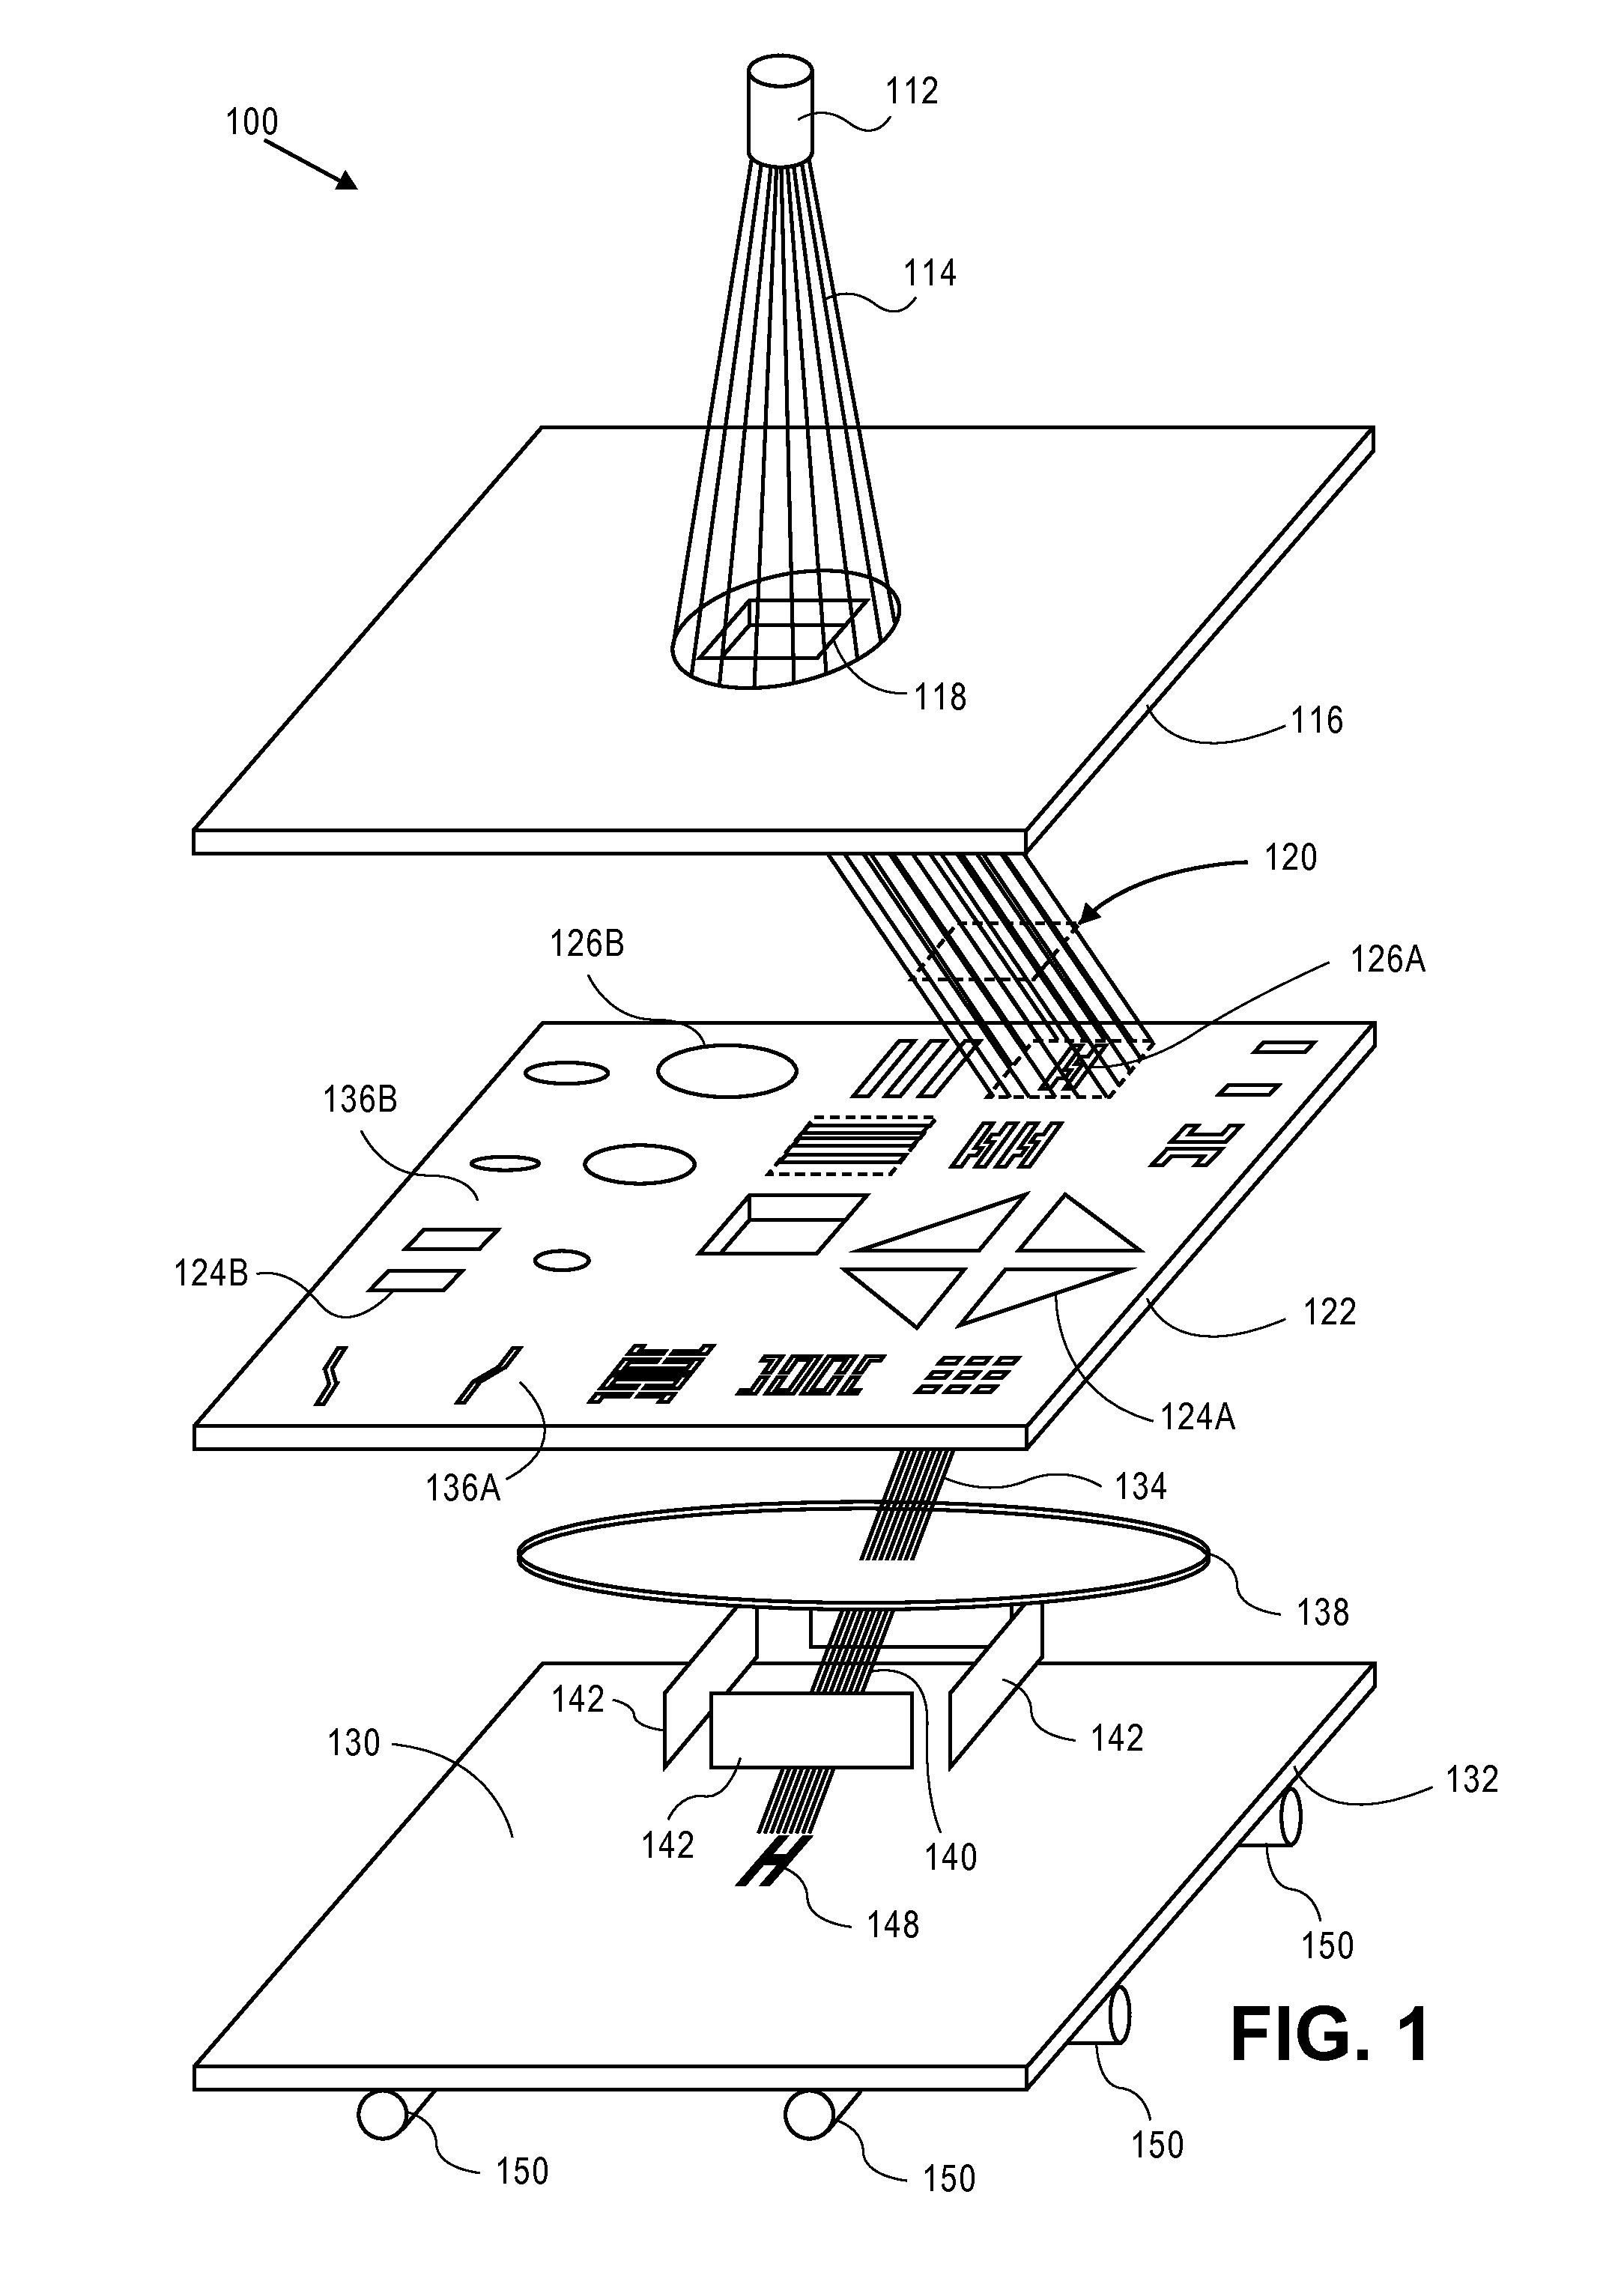 Method and System for Forming High Accuracy Patterns Using Charged Particle Beam Lithography